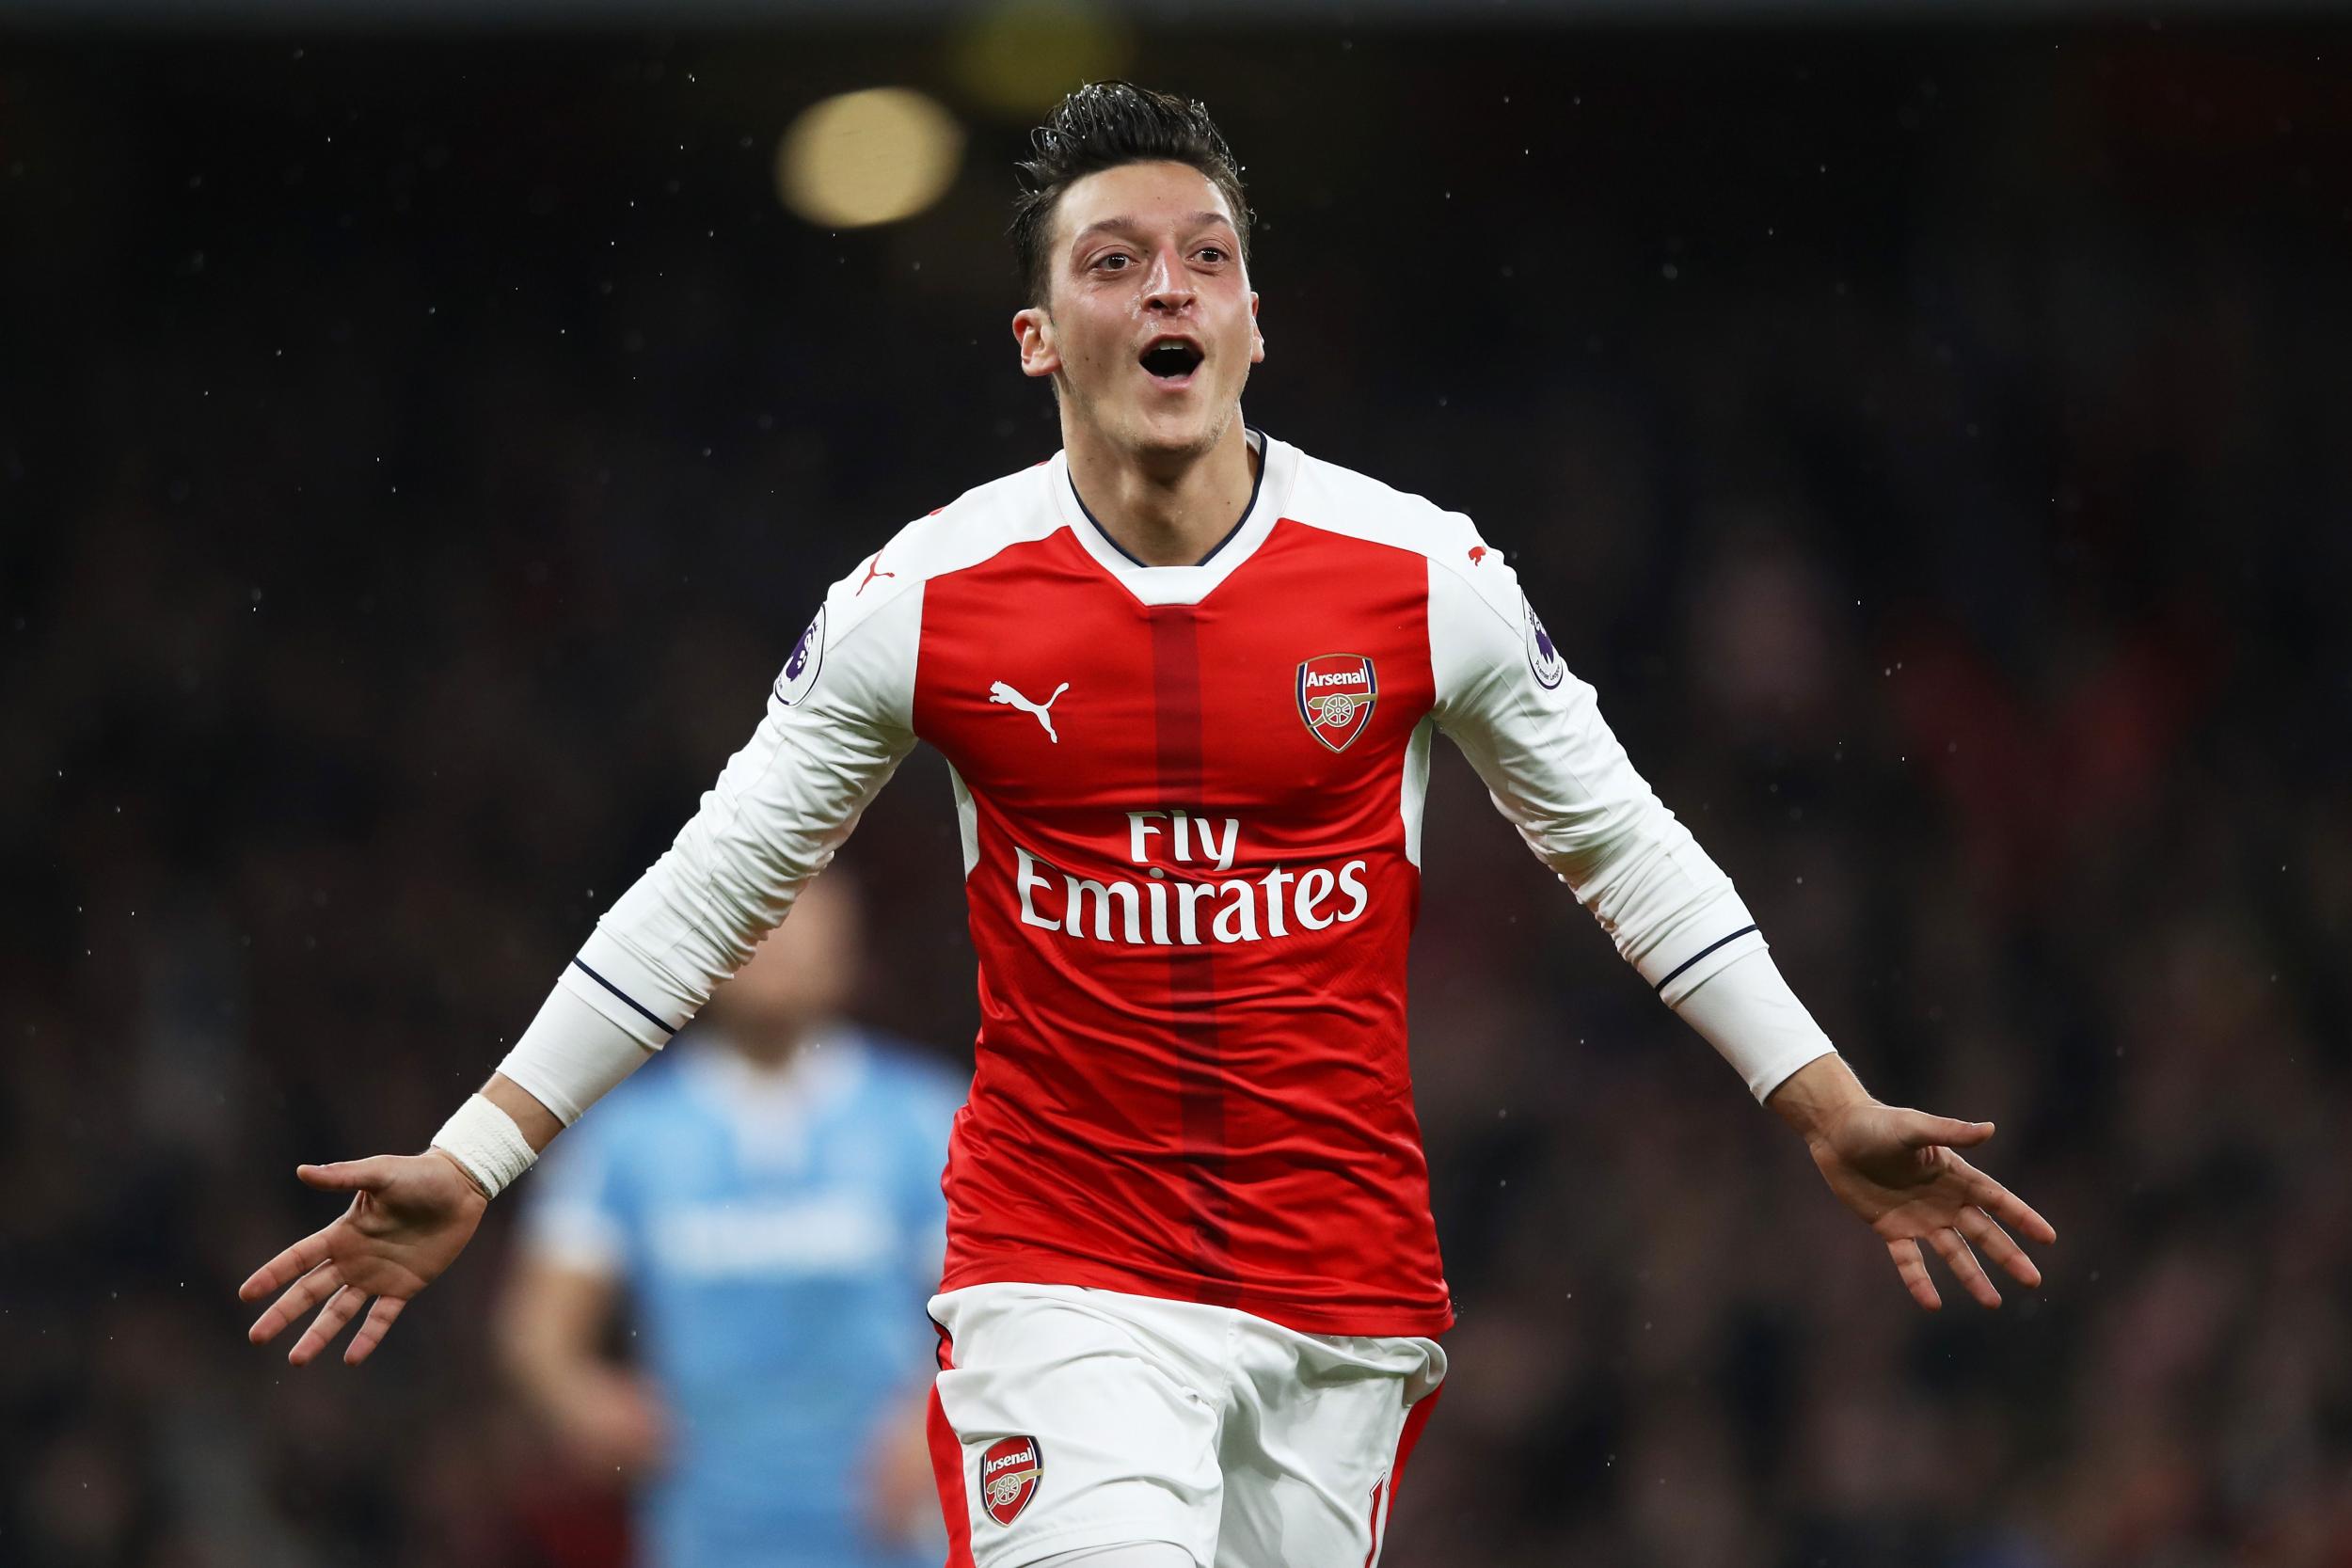 Mesut Ozil gives Arsenal the lead with a looping header